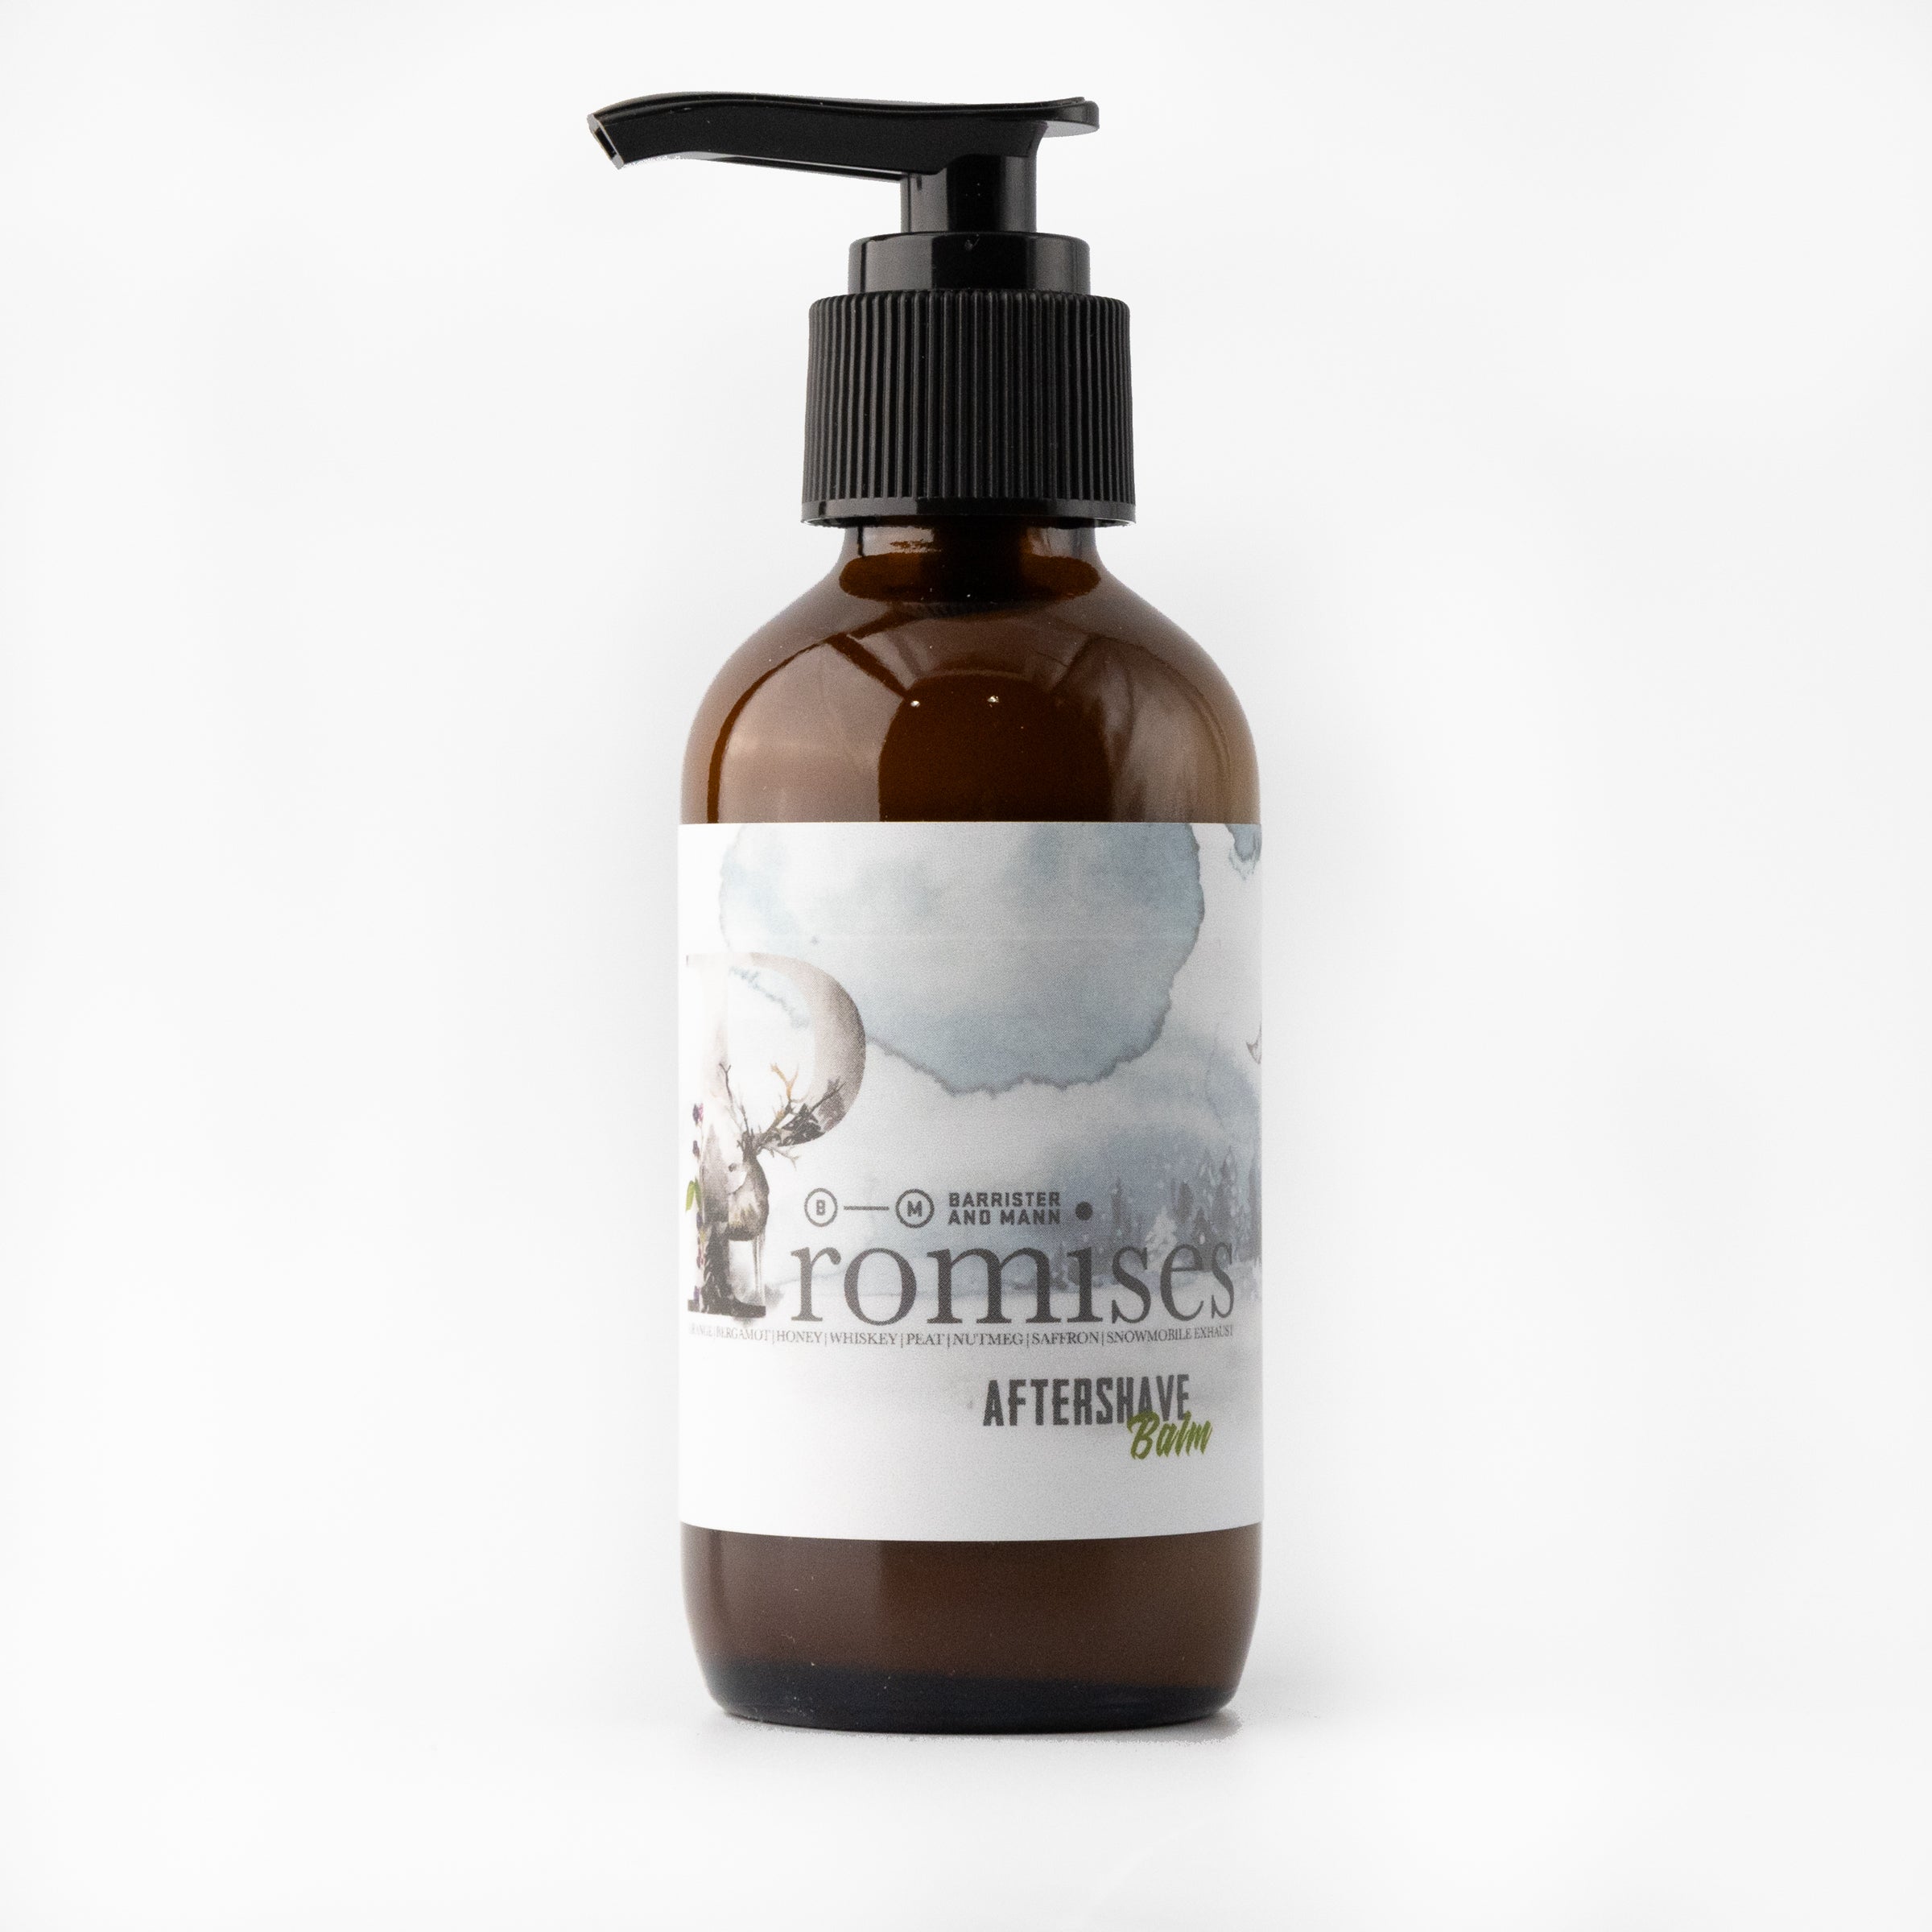 Promises Aftershave Balm - Barrister and Mann LLC